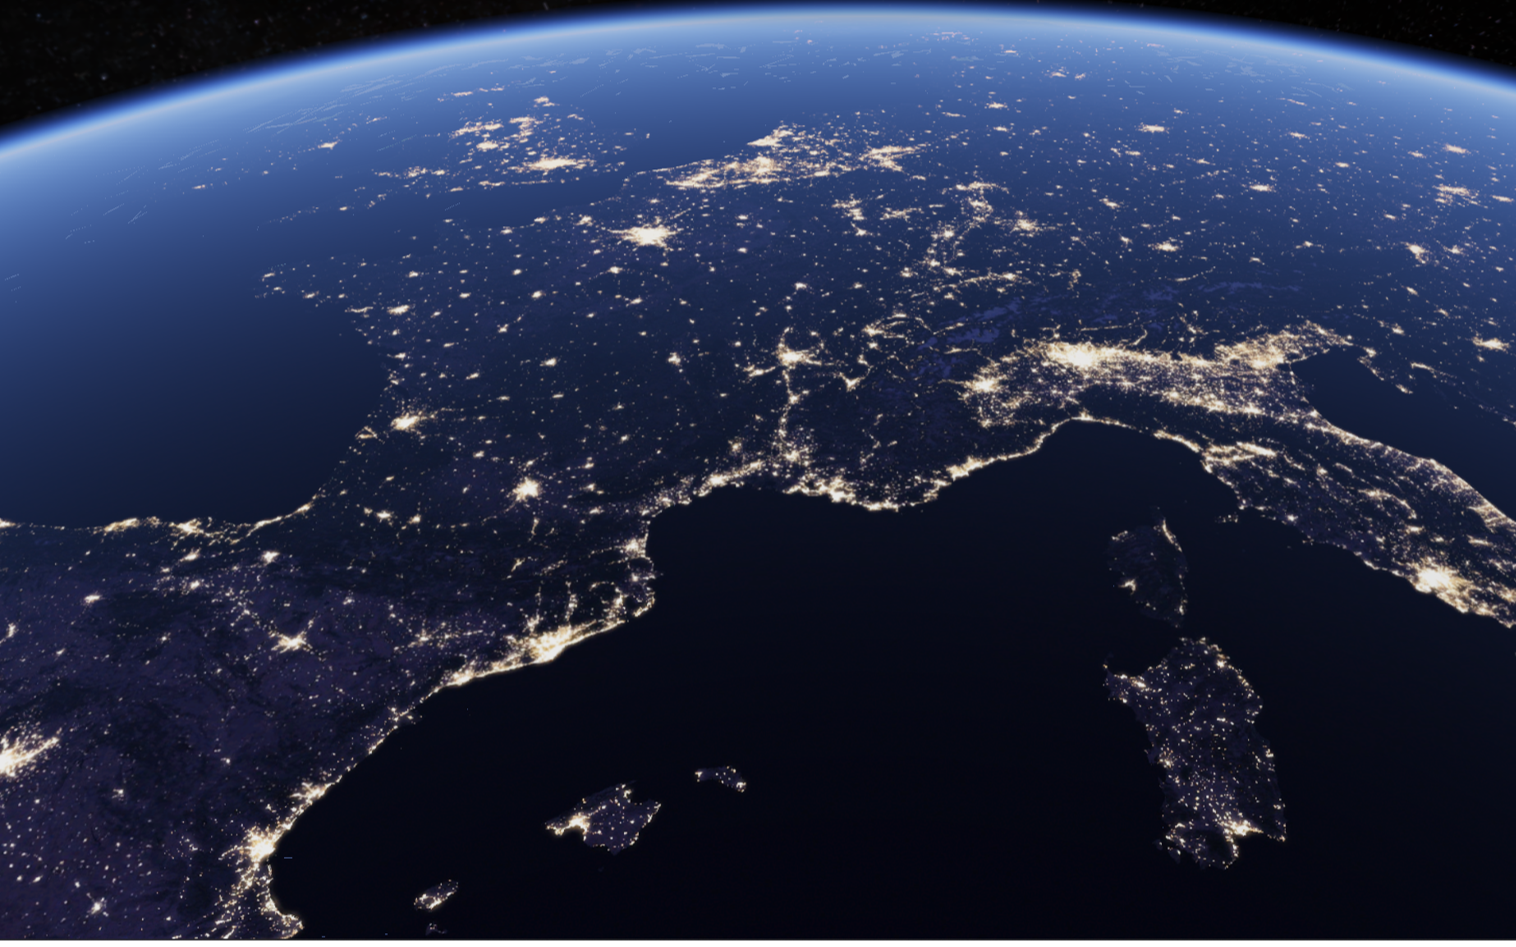 Satellite view of Europe at night, showing the light networks across the continent